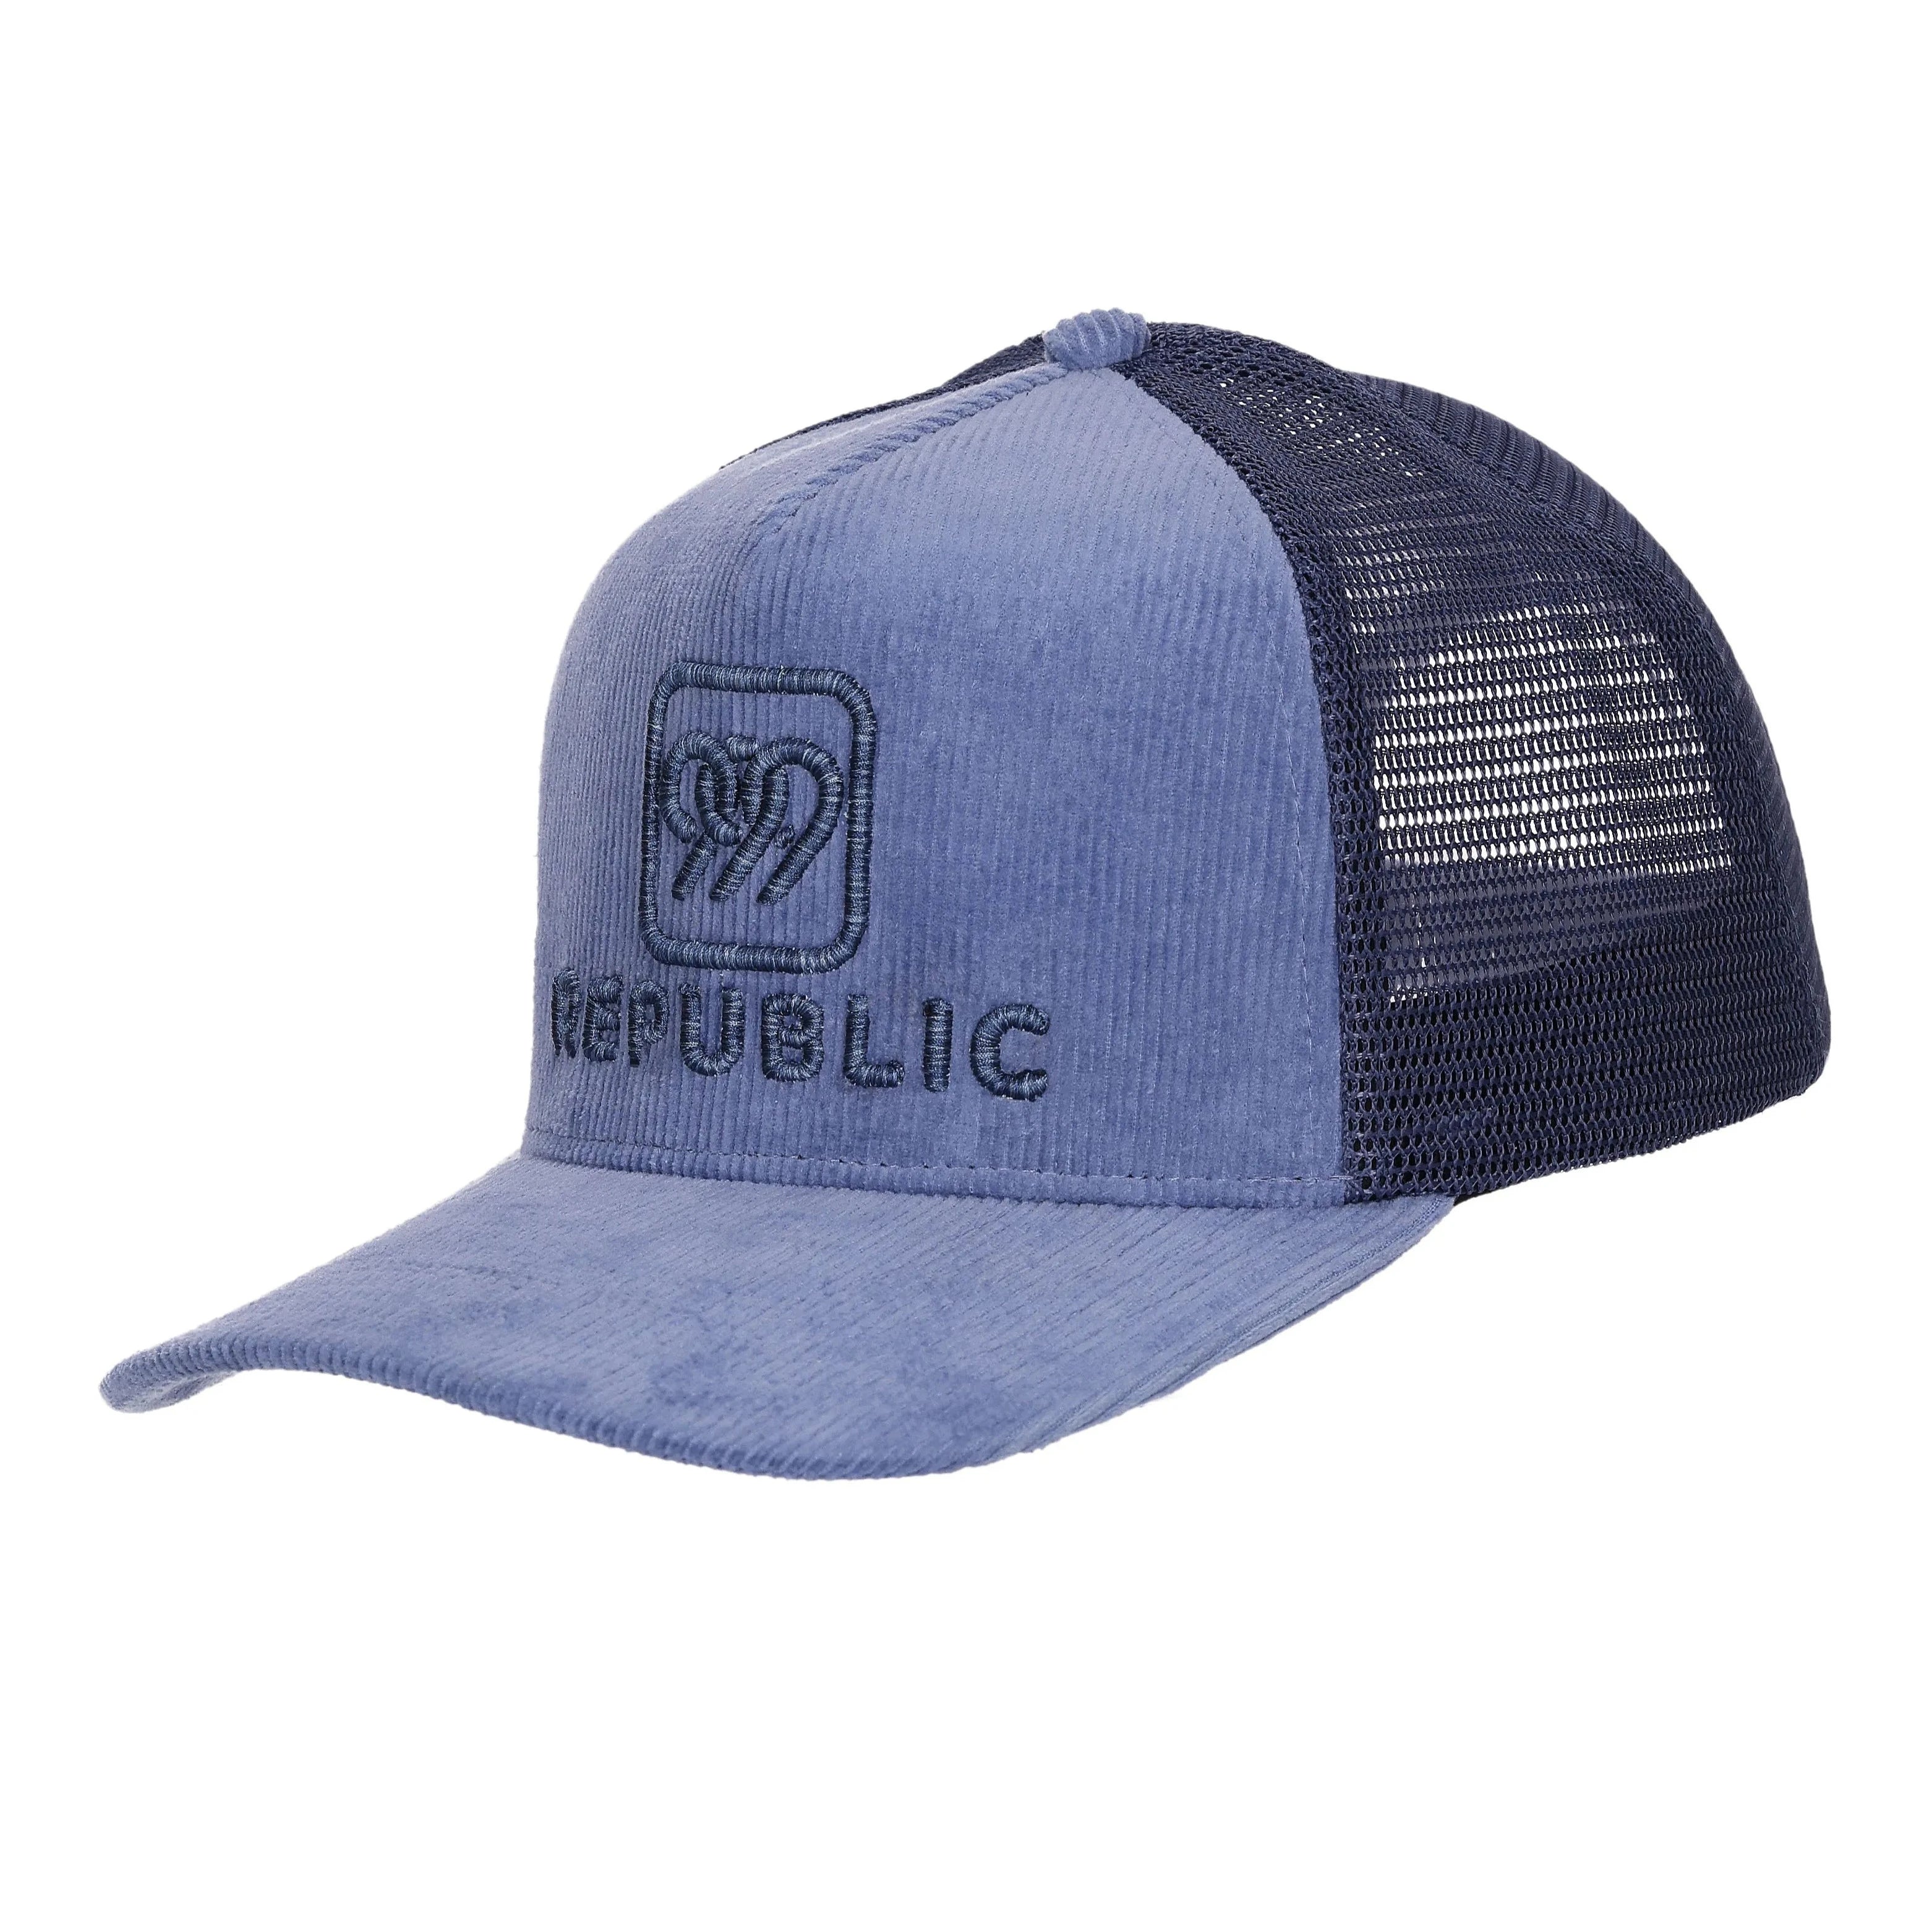 999Republic logo embroidered with Multicoloured Thread on a Blue coloured Trucker cap